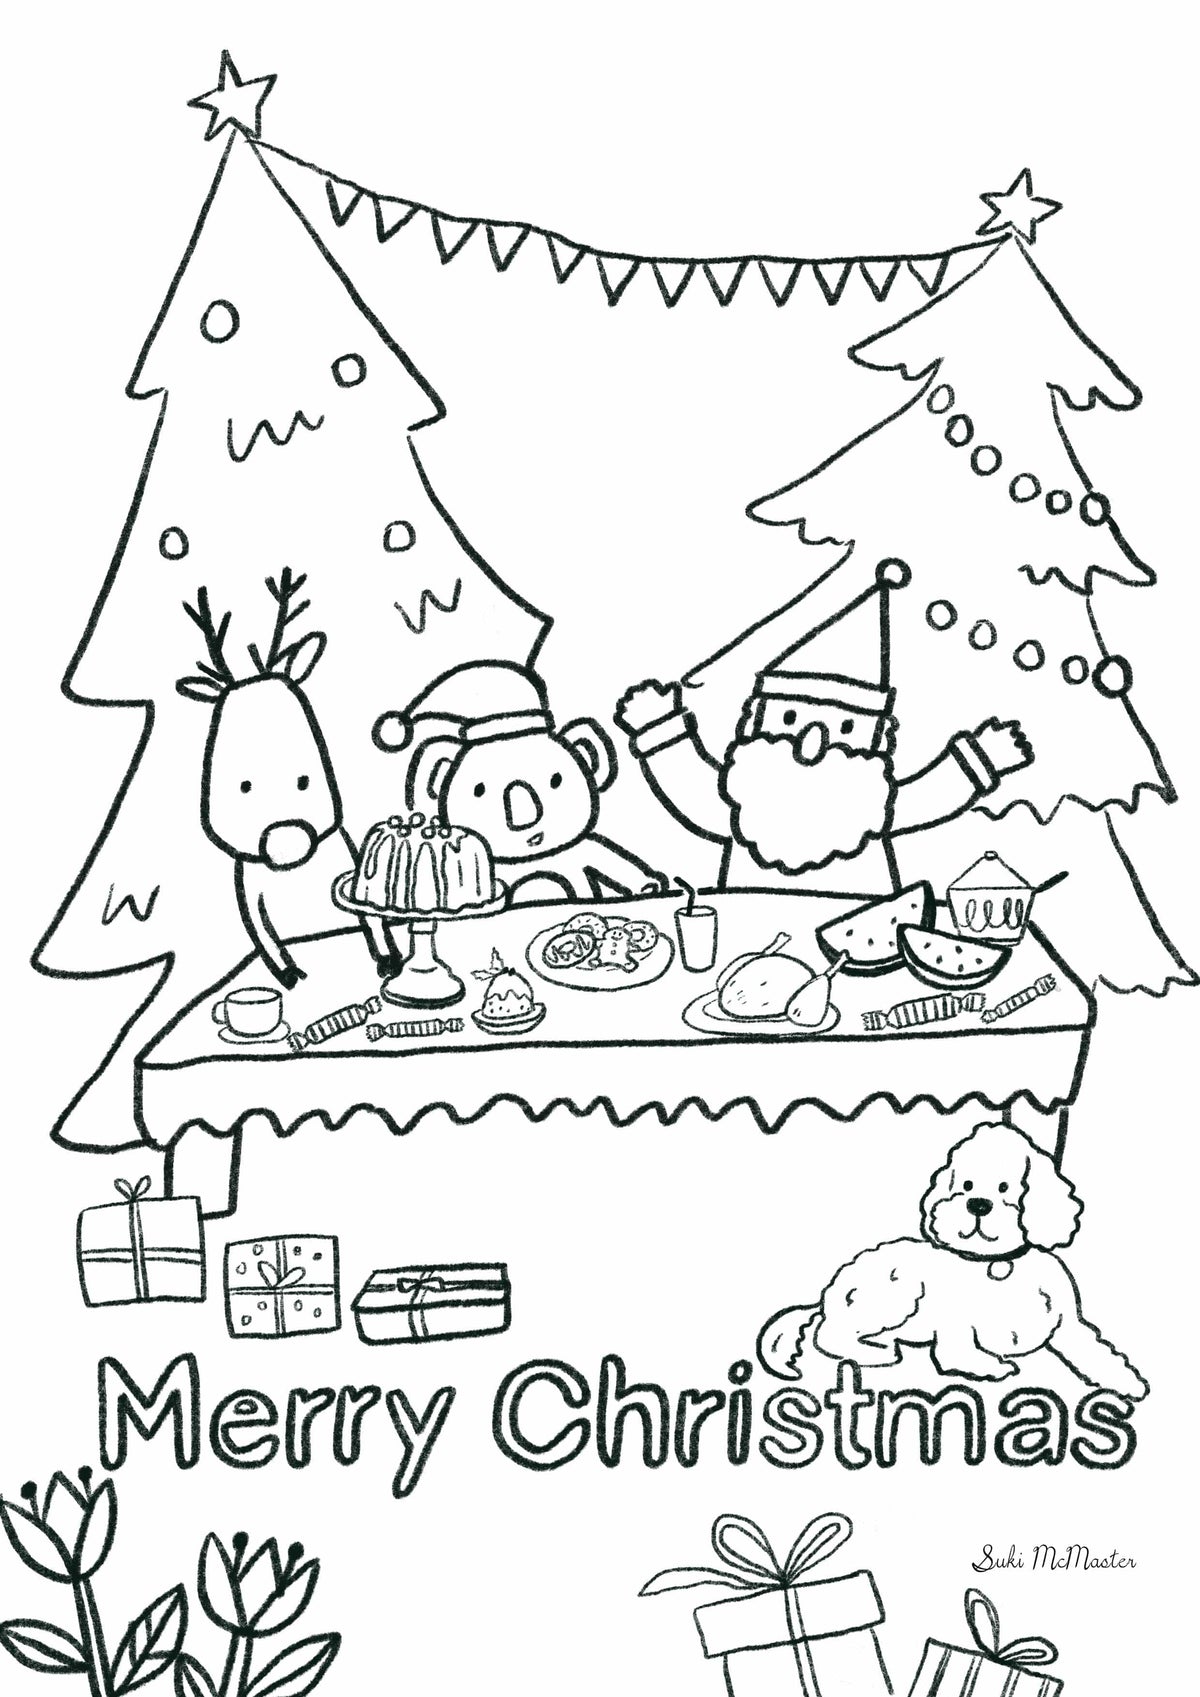 Christmas colouring in